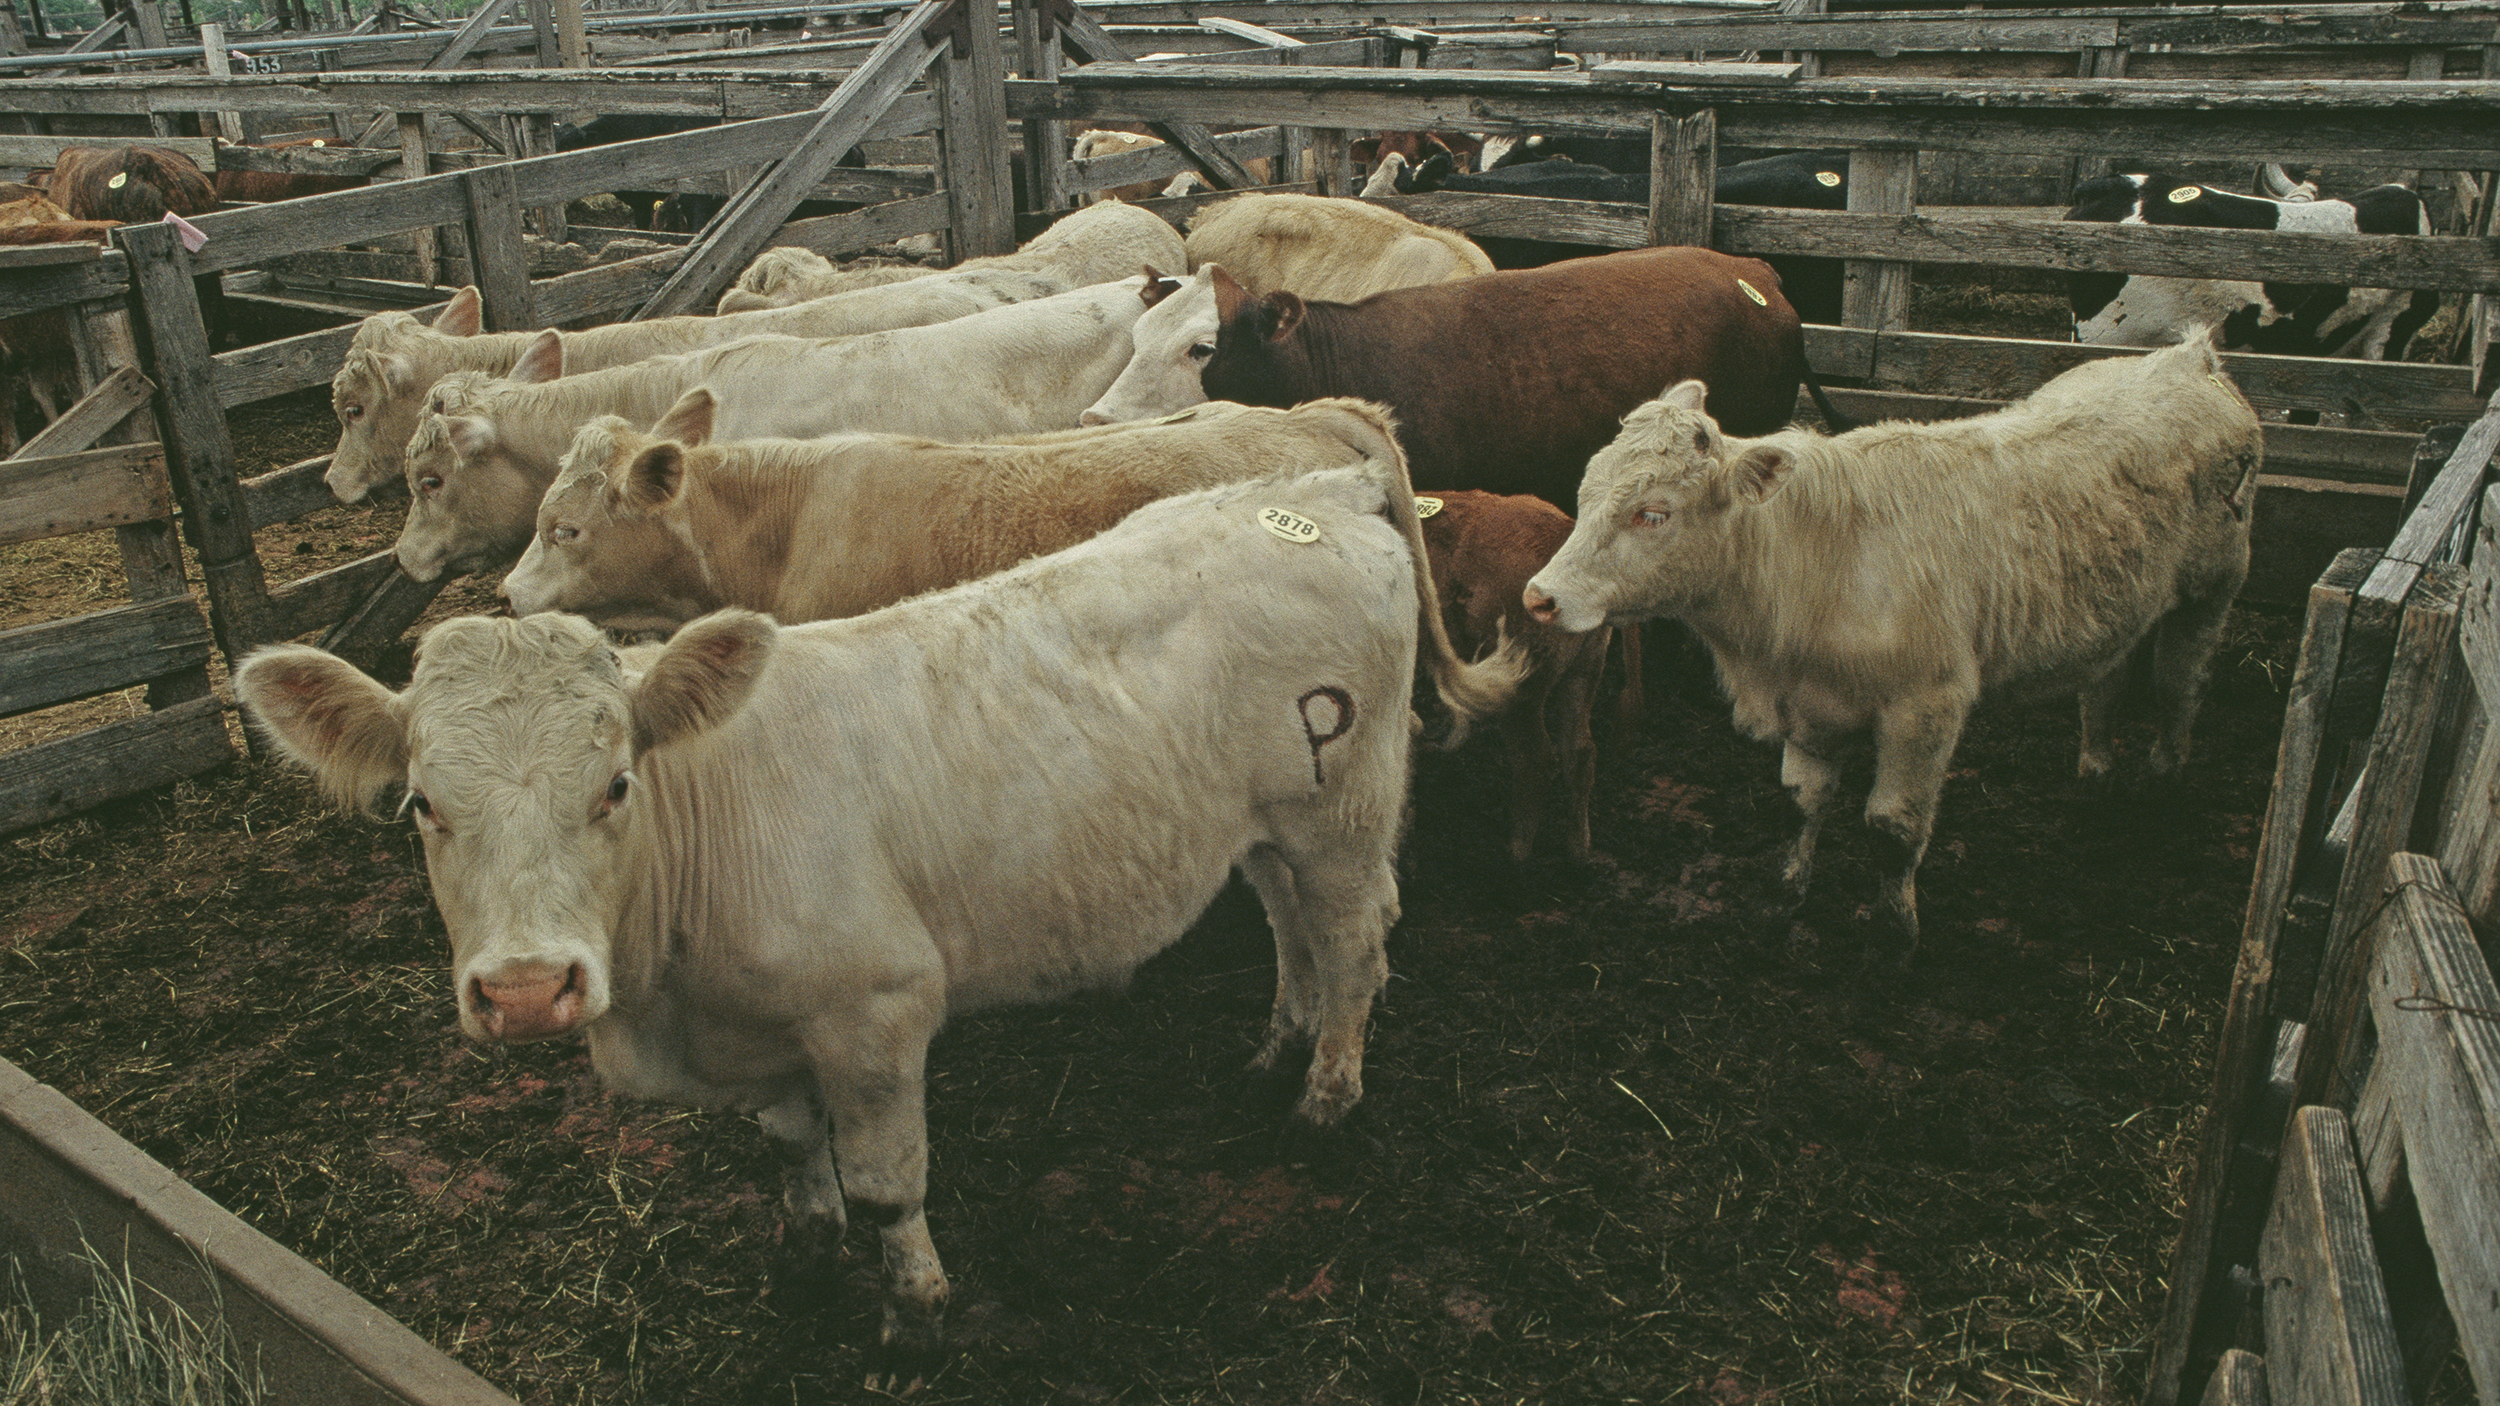 A group of cows in a pen, demonstrating the peaceful coexistence of farm animals.